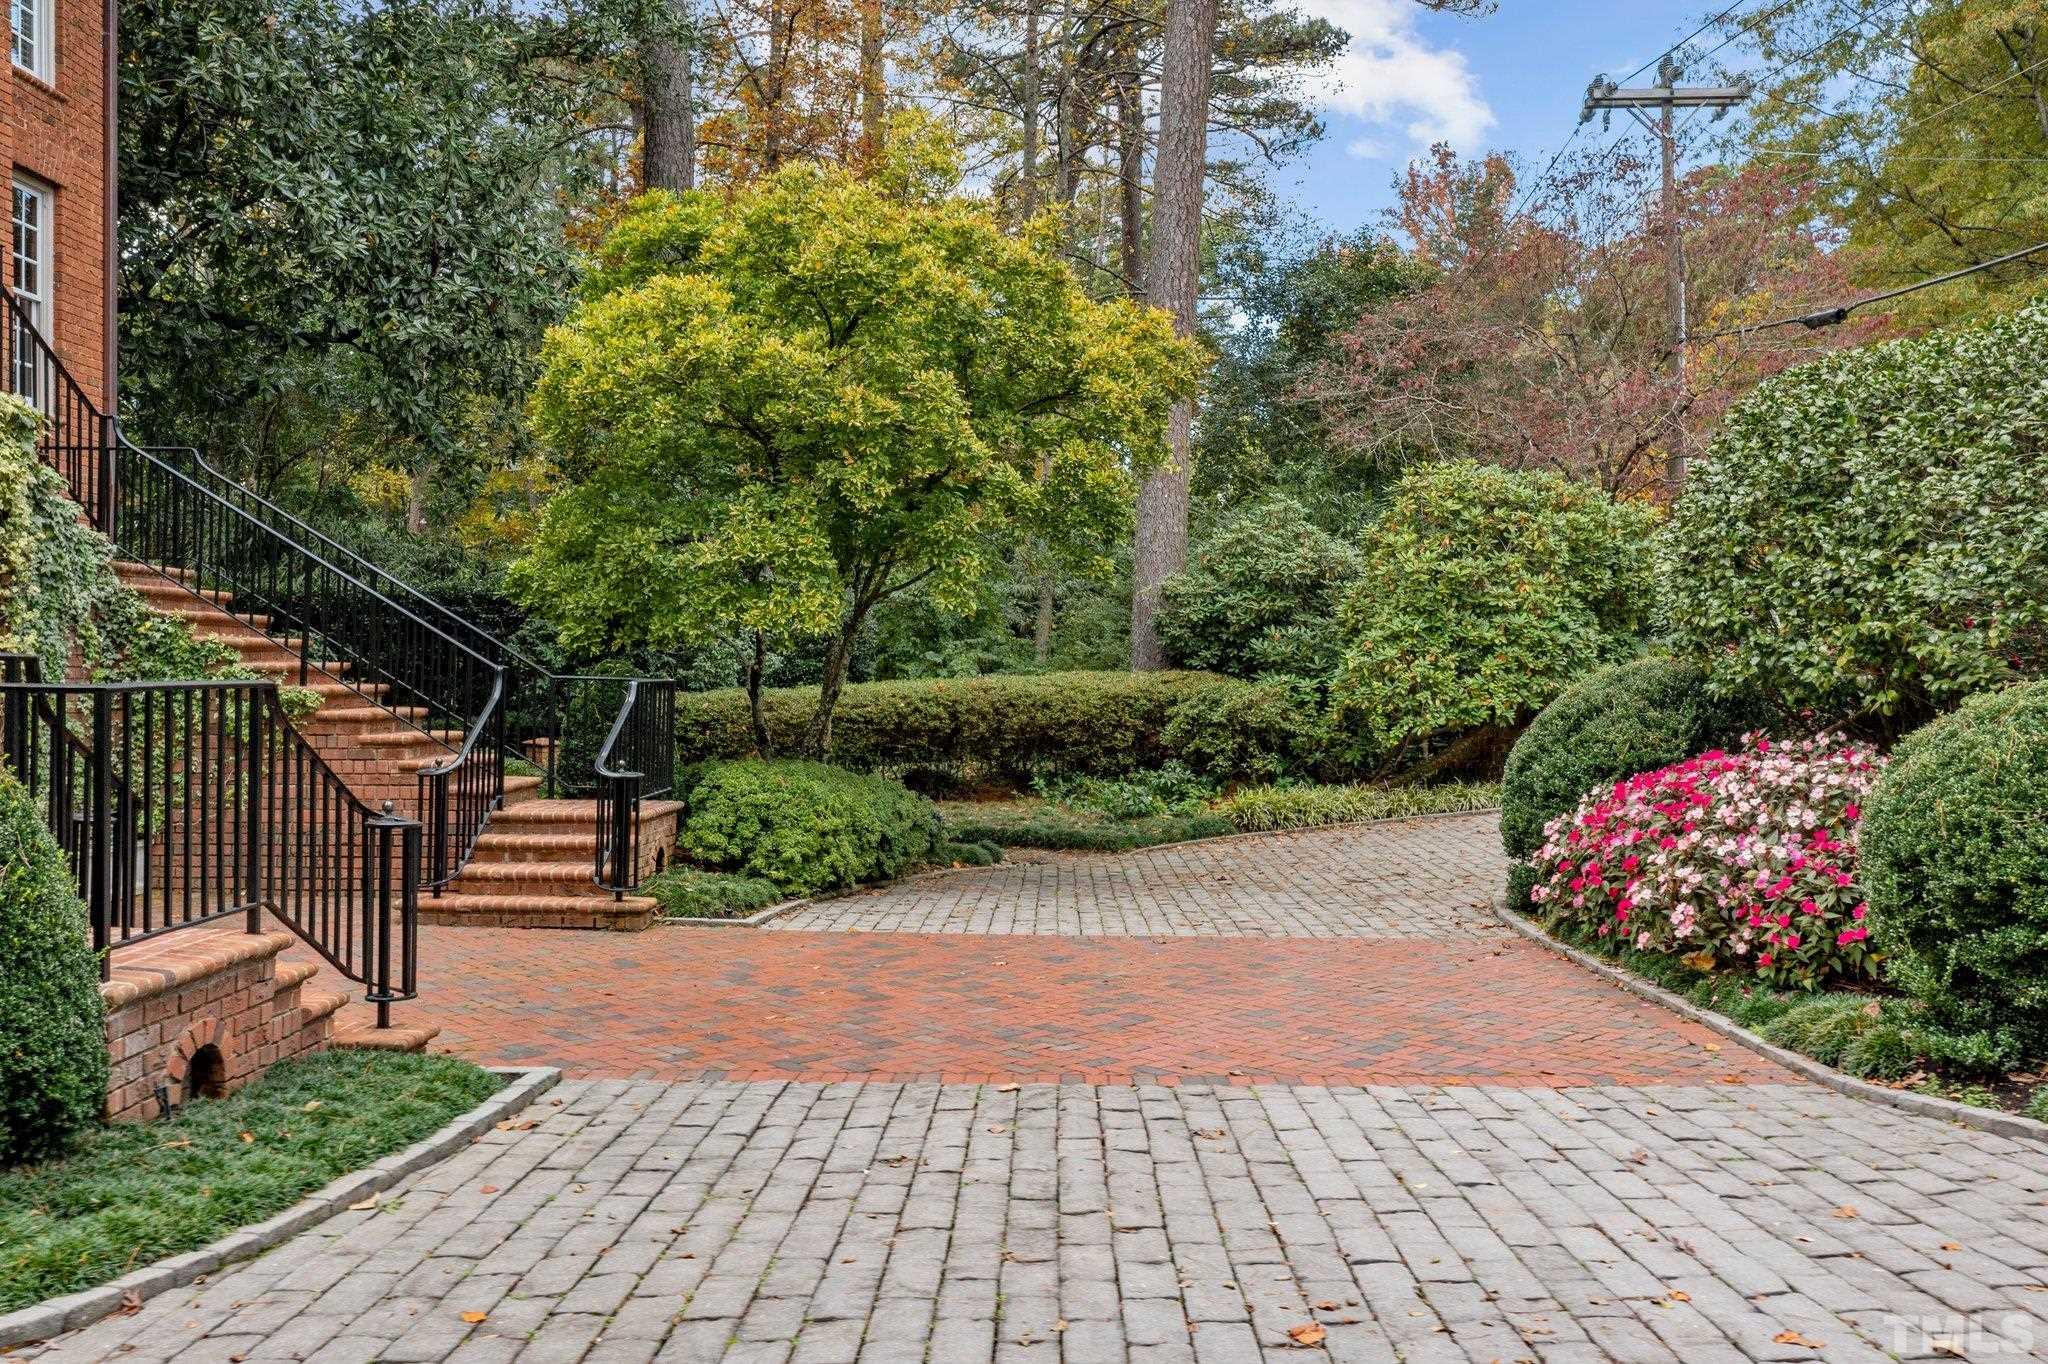 Gracious drive is nestled between double entry staircase and the lushly landscaped brick retaining wall.